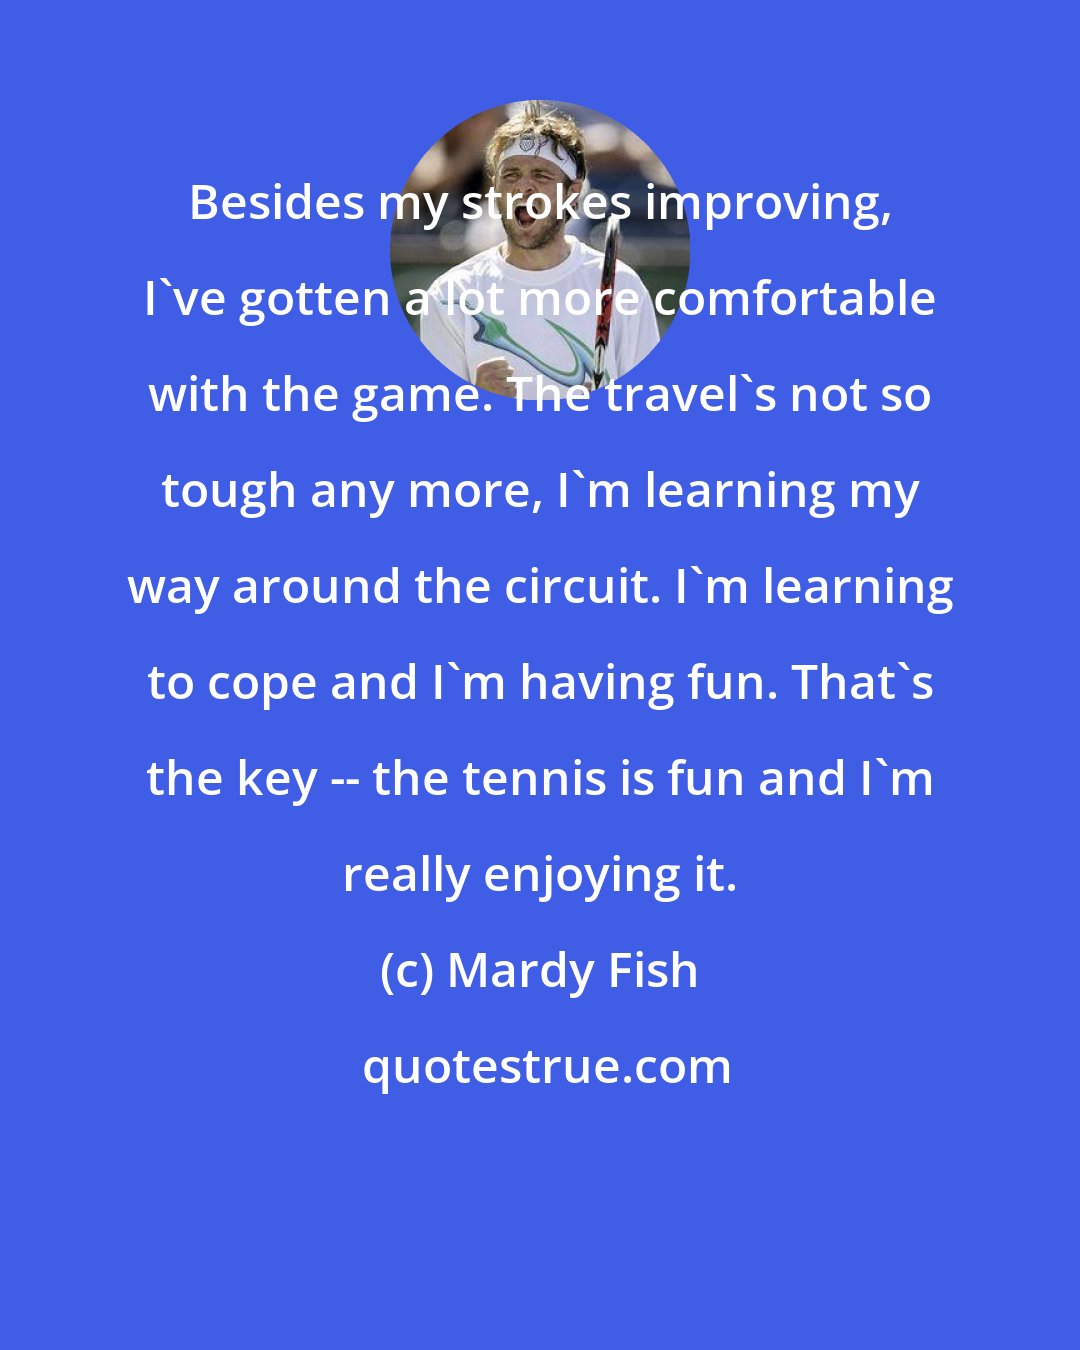 Mardy Fish: Besides my strokes improving, I've gotten a lot more comfortable with the game. The travel's not so tough any more, I'm learning my way around the circuit. I'm learning to cope and I'm having fun. That's the key -- the tennis is fun and I'm really enjoying it.